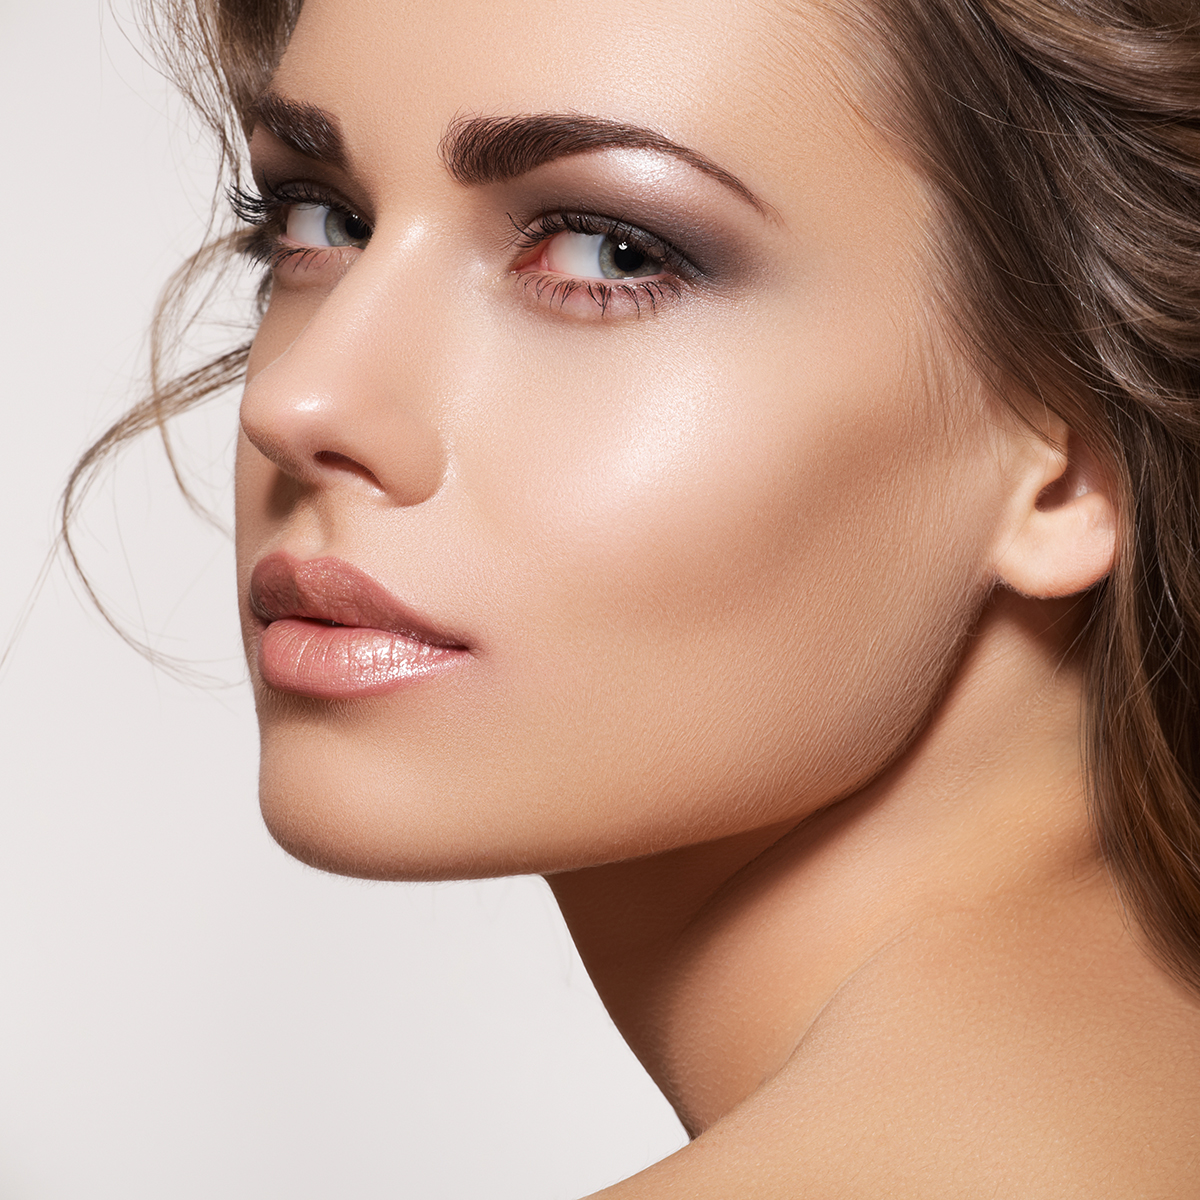 How effective are Juvéderm fillers - Huntington NY Area